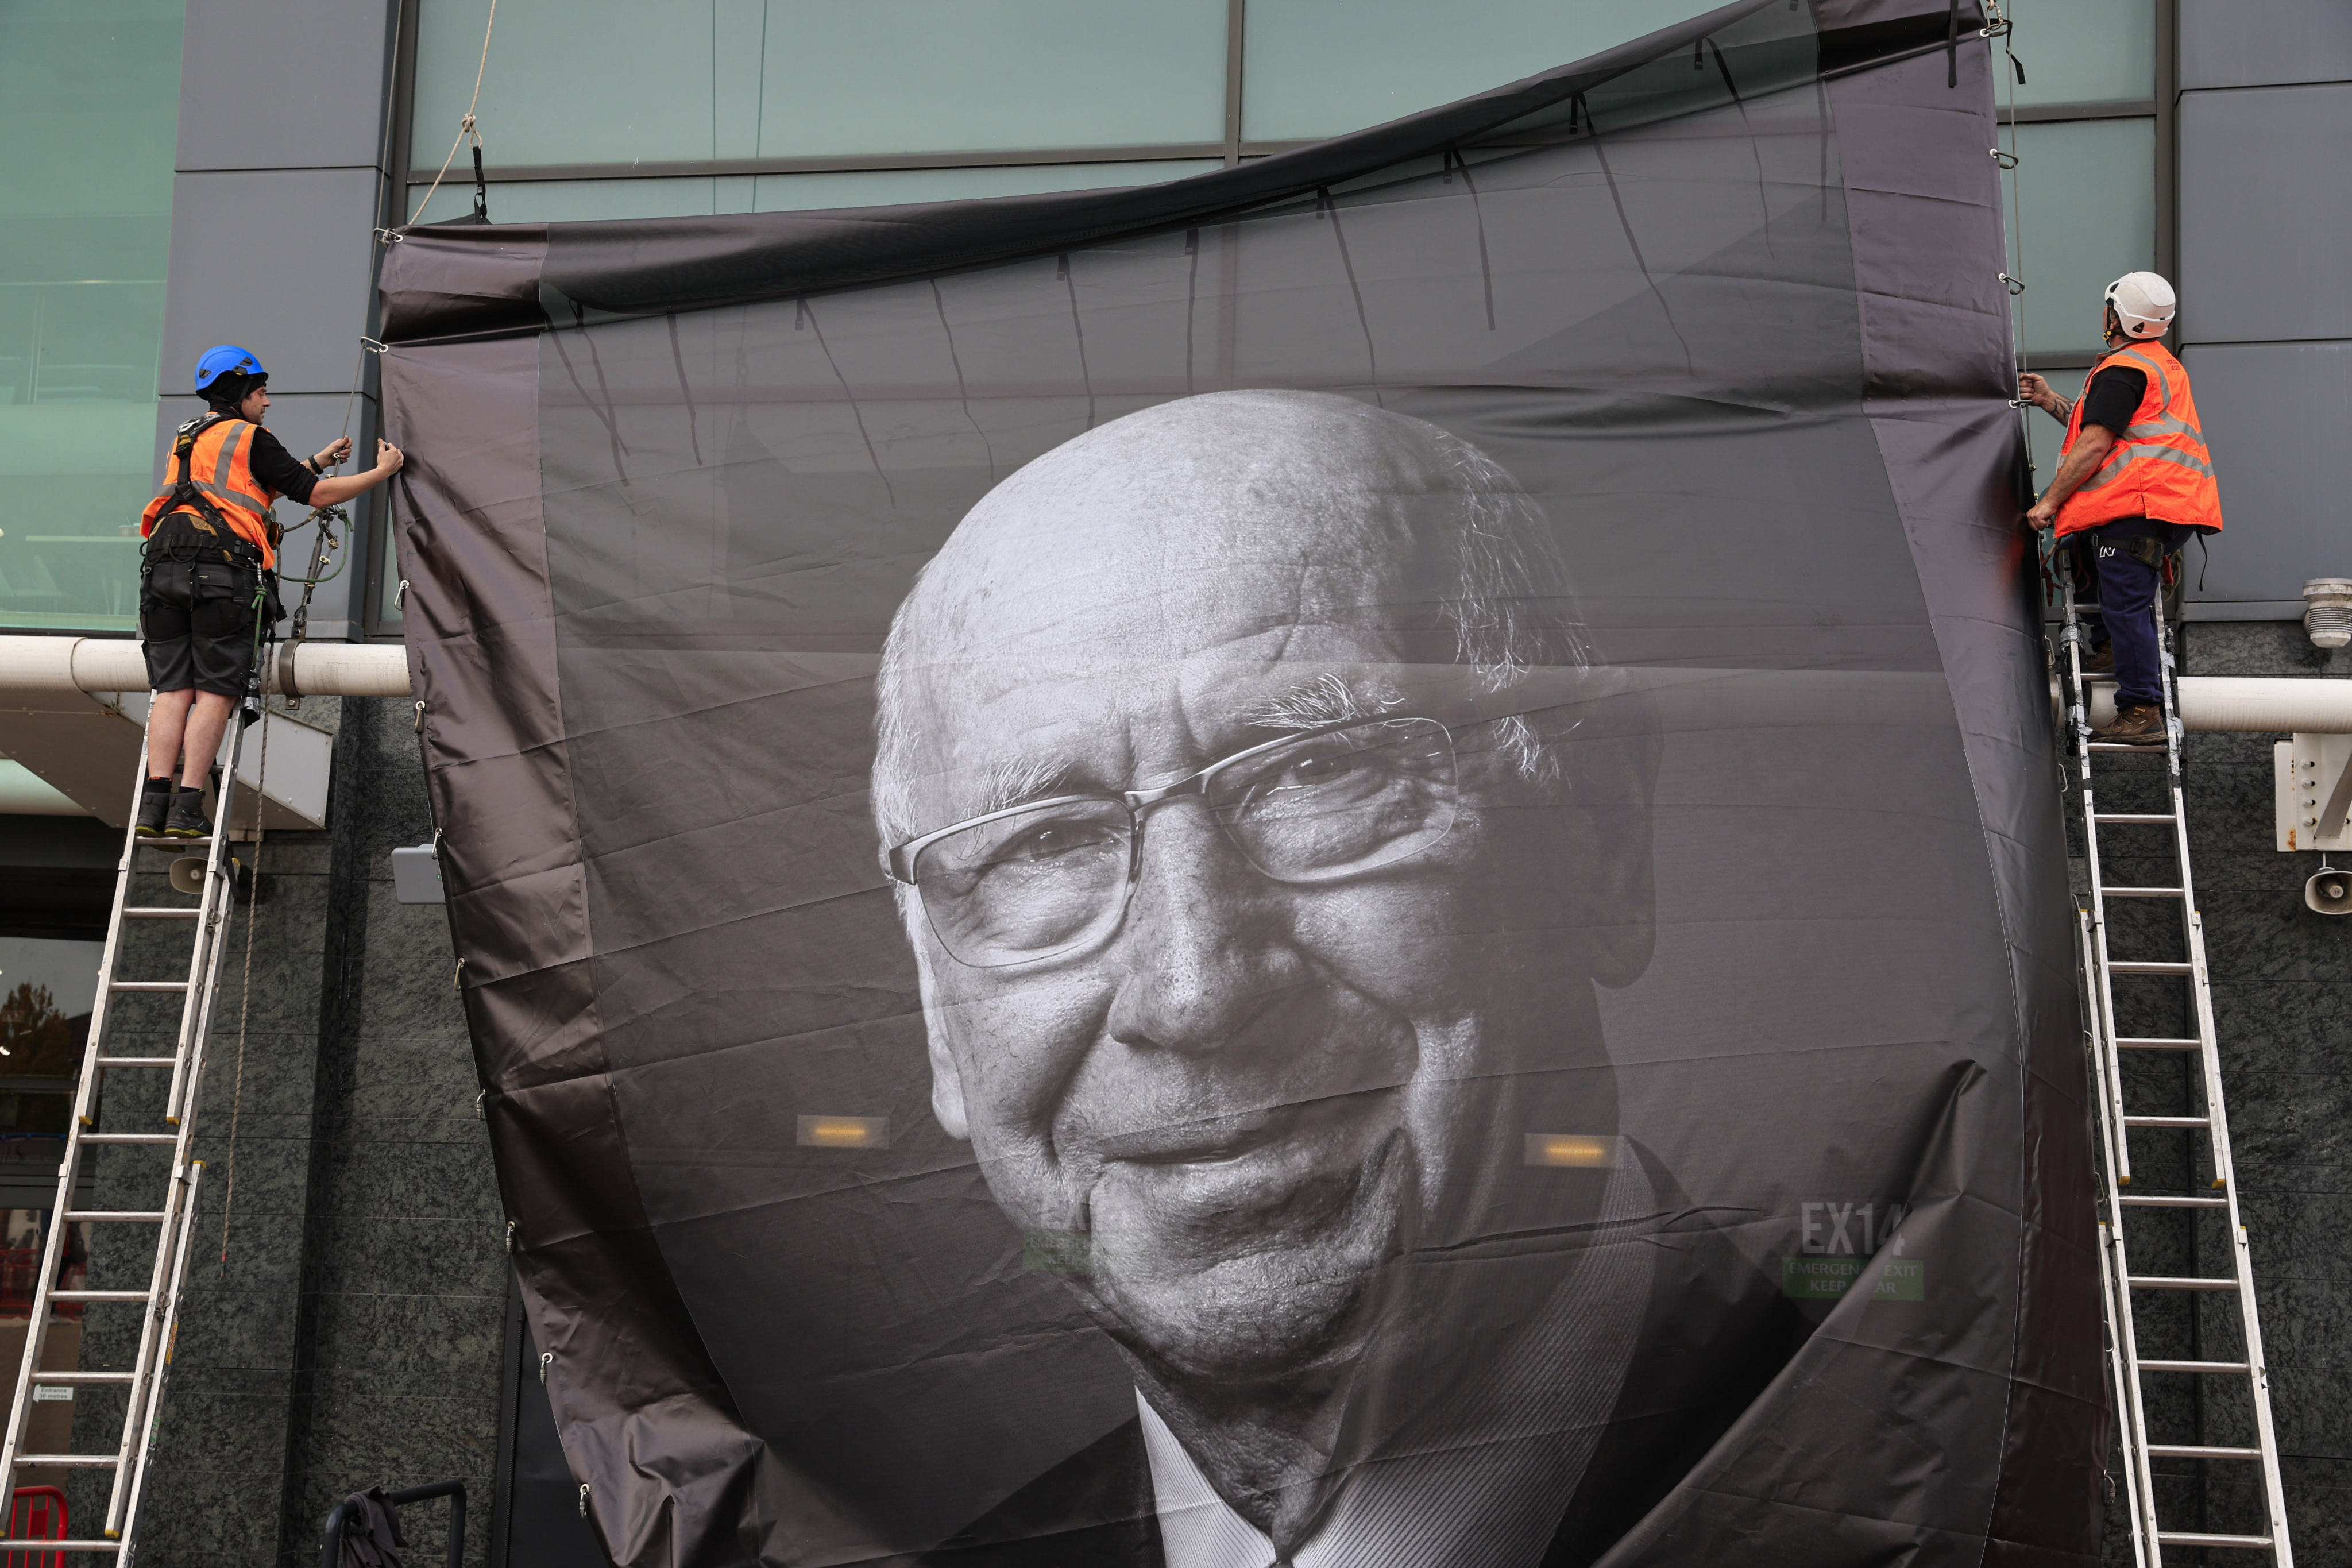 Workers place a memorial poster to the late Sir Bobby Charlton outside Old Trafford. Photo: dpa